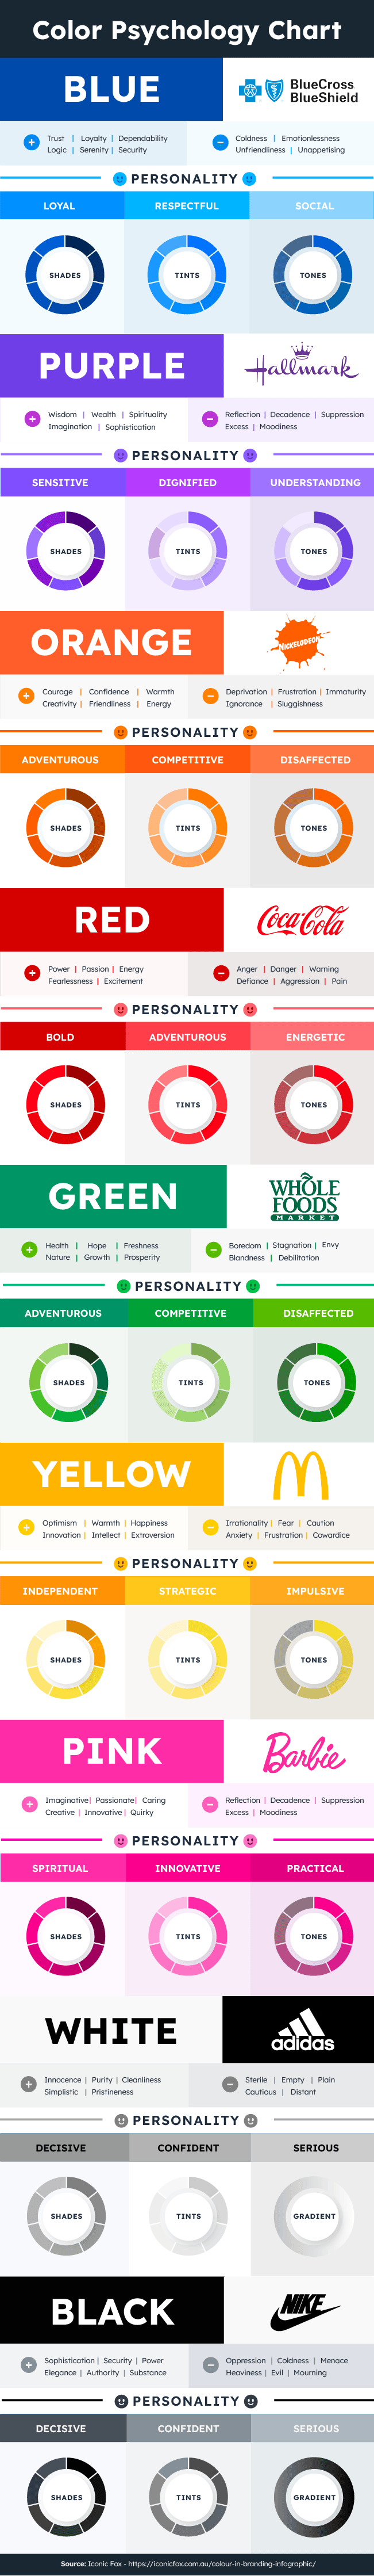 Color Psychology Chart: this chart shows the color psychology of colors, including their associations, their personality types, and logo examples.